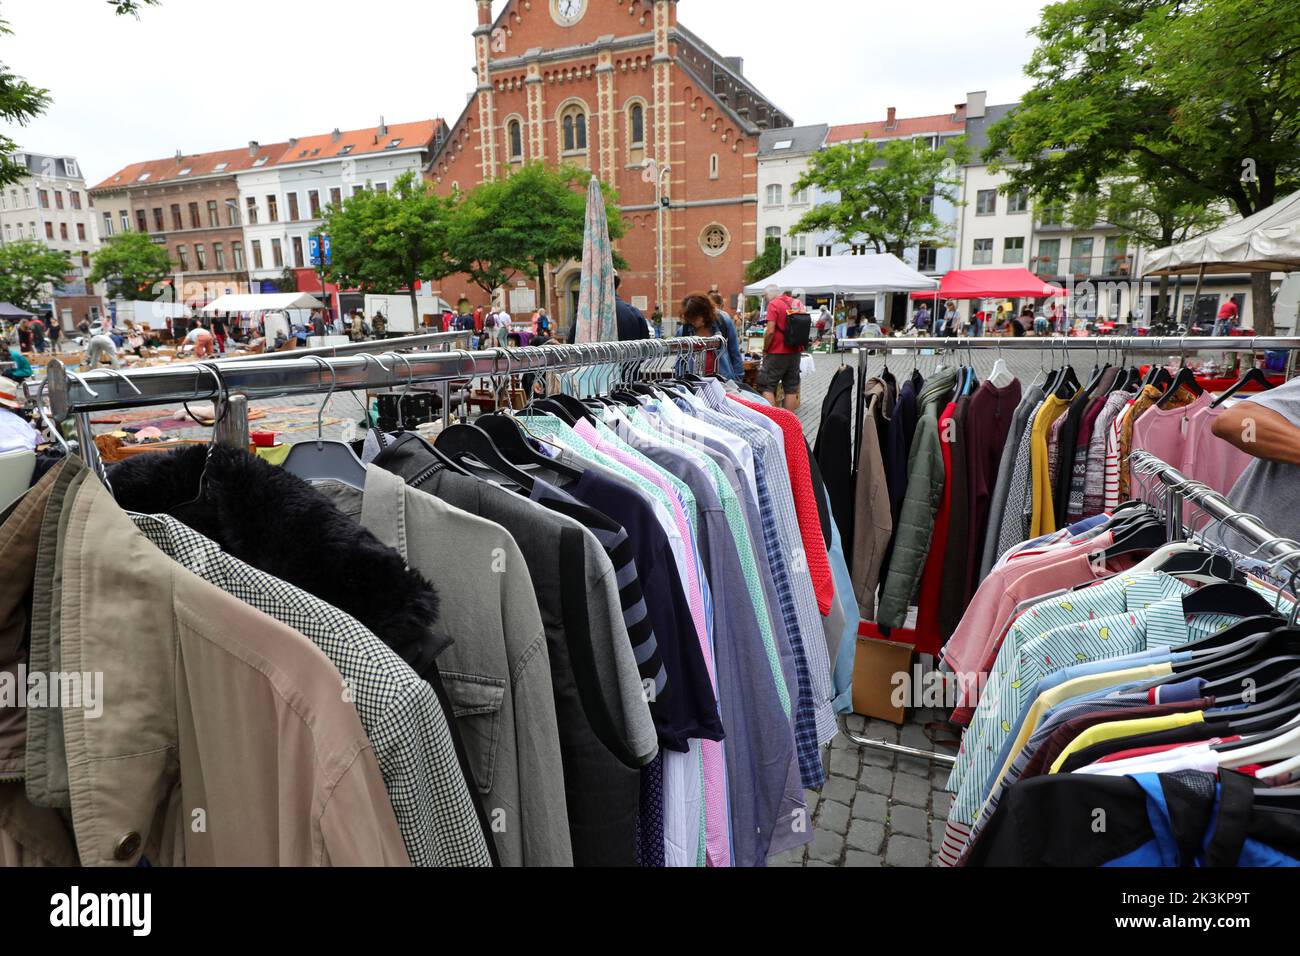 used clothes in the outdoor flea market stall with many bargains Stock Photo